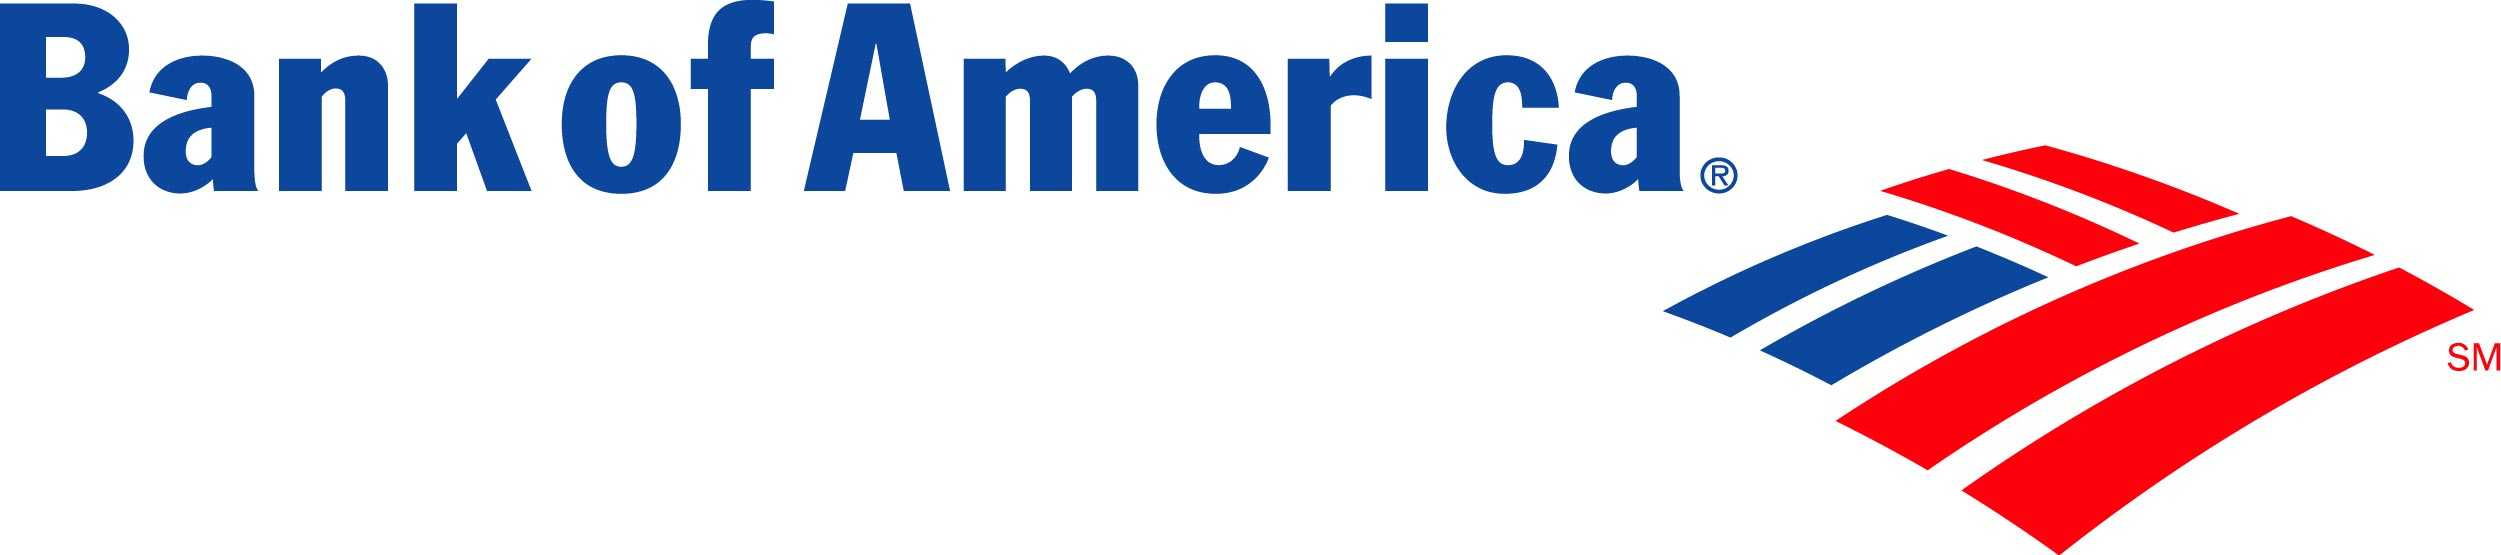 Old Bank of America Logo - Bank of America Short Sale Agent